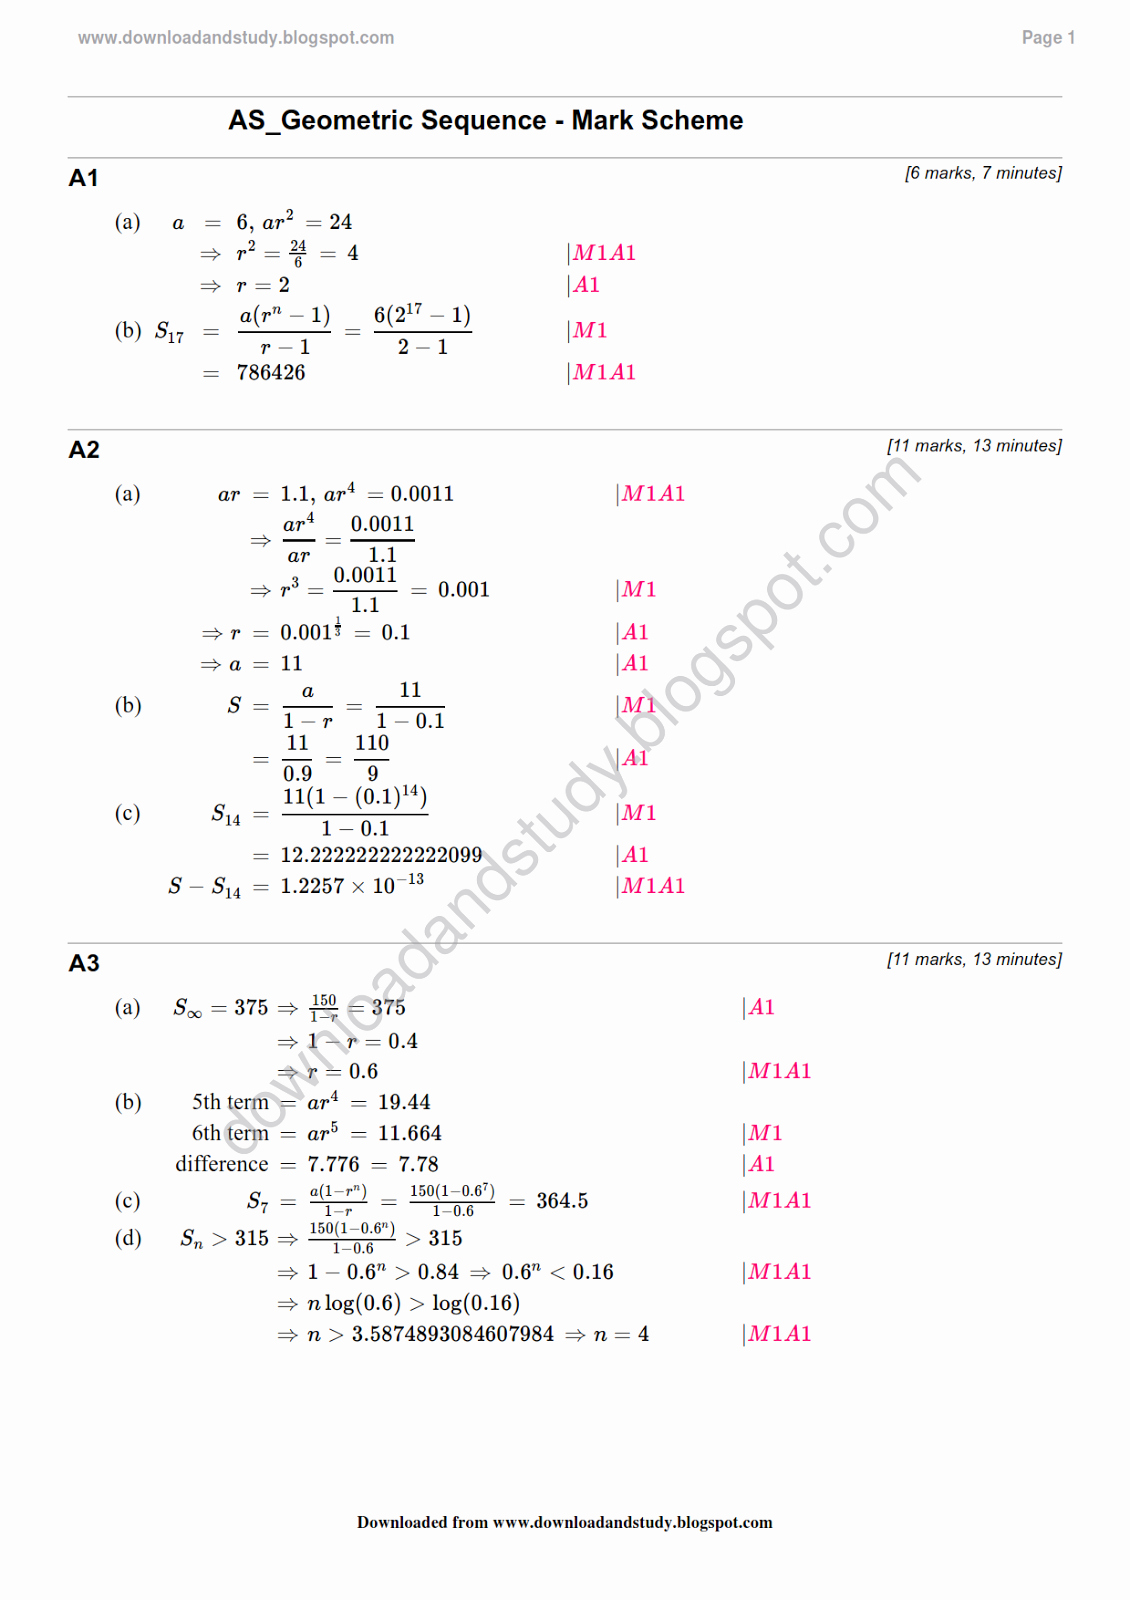 Sequences and Series Worksheet Answers Unique Download &amp; Study solution to as Maths Geometric Sequence